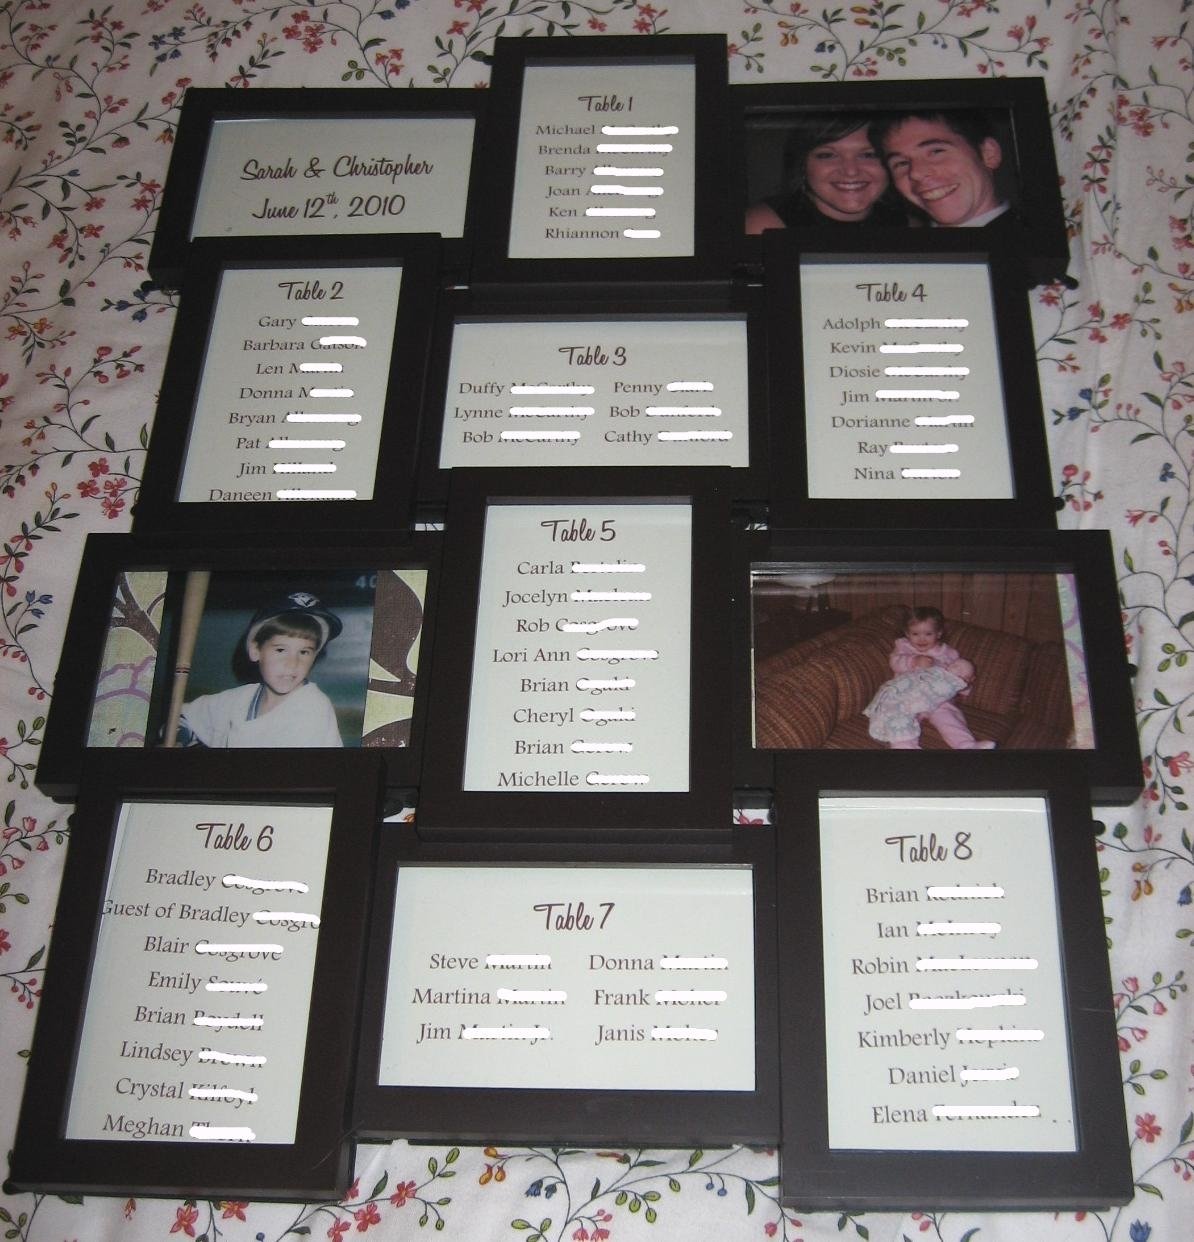 10 Wonderful Wedding Reception Seating Chart Ideas seating chart idea so easy just print off in that size and put 2022